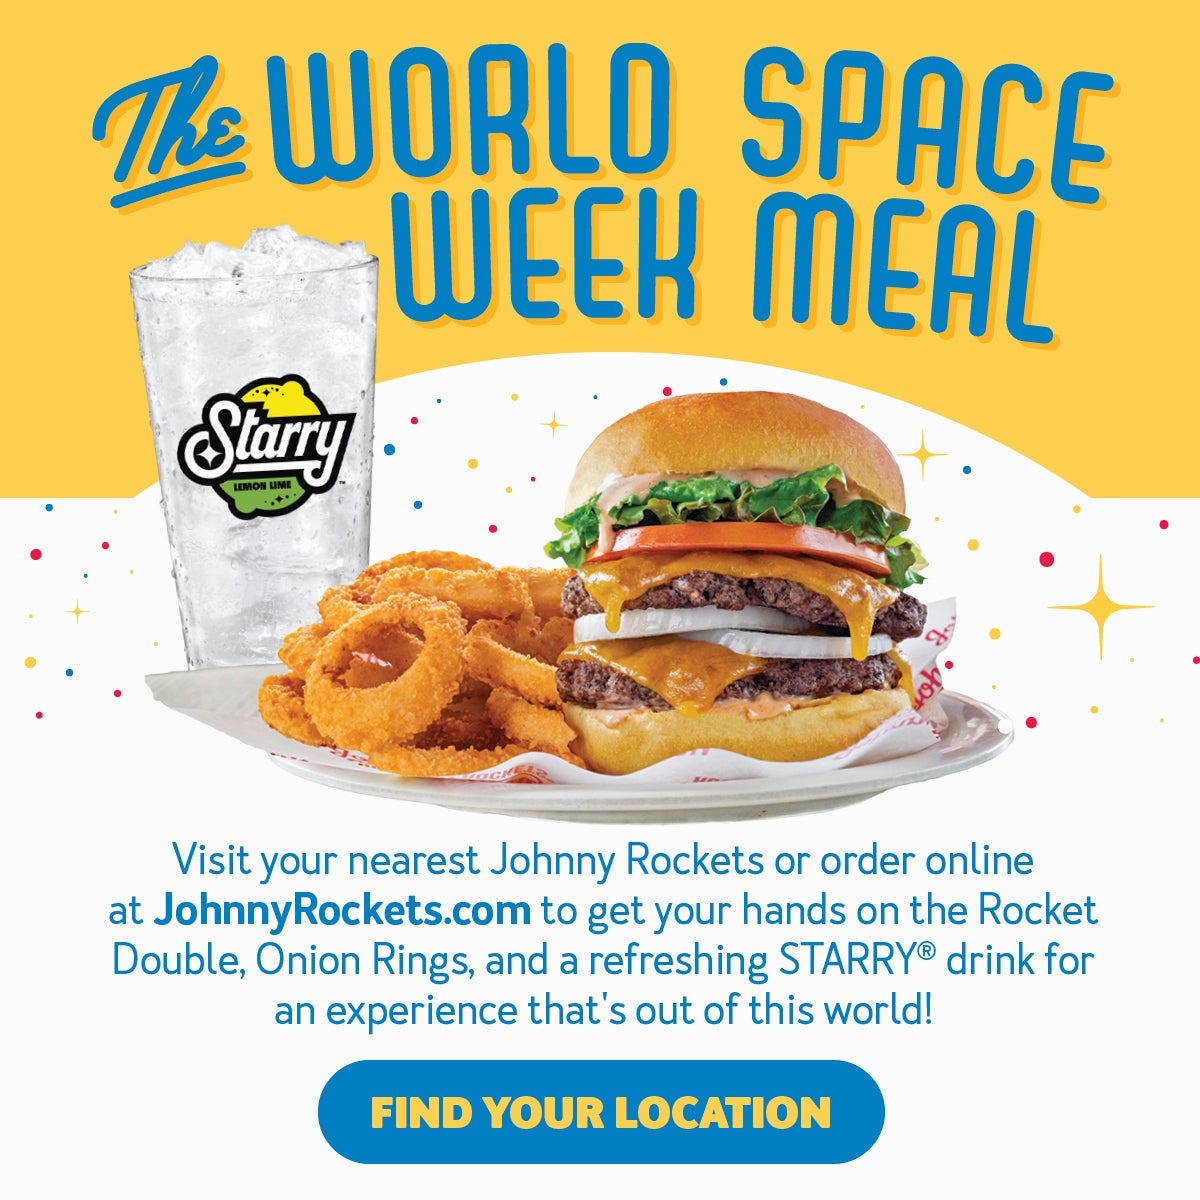 Try the World Space Week Meal, available for a limited time only!